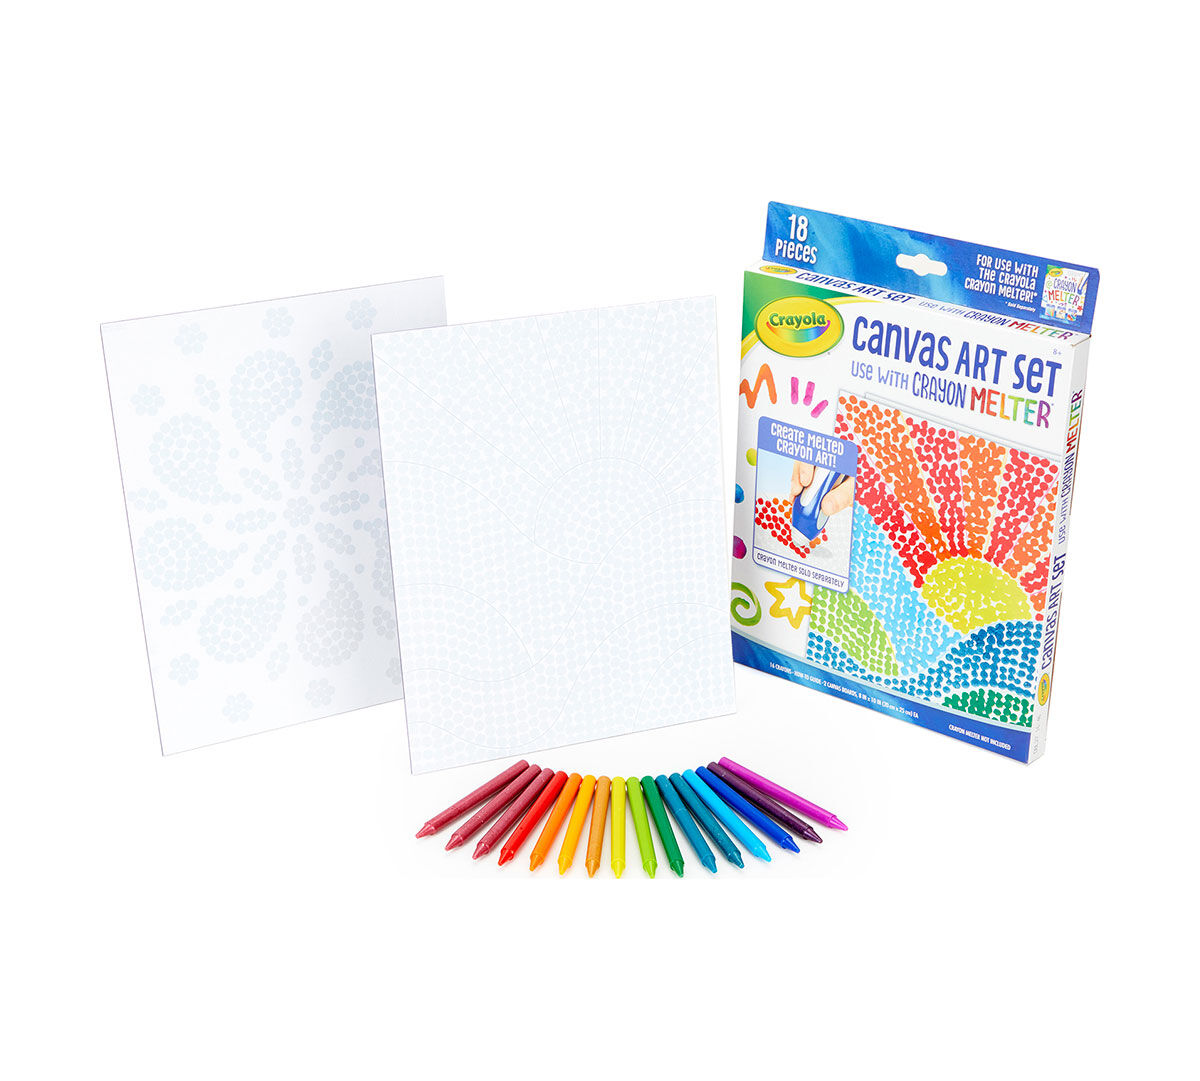 8 10 9 11 Crayon Melter Expansion Gift for Kids Crayola Silhouette Art Sticker Kit